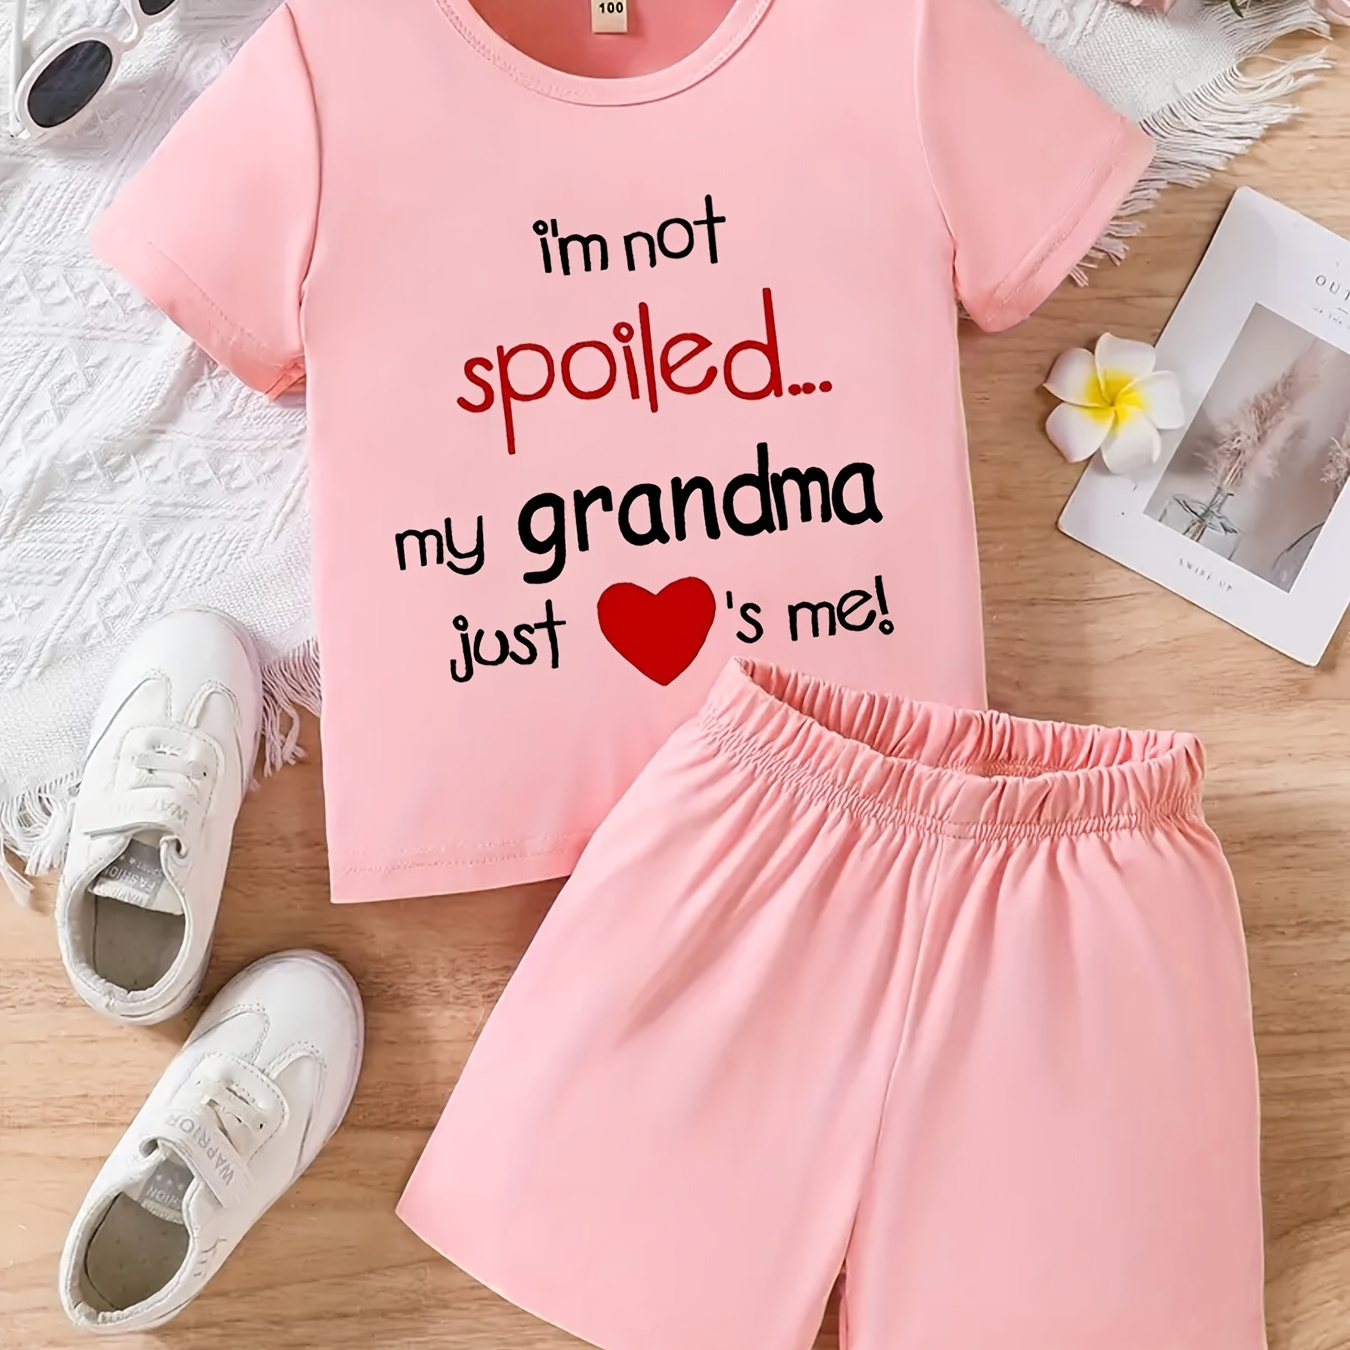 

Cute Girl Summer Outfits - 2 Piece Letter "i'm Notspoiled Grandmamy Just's Me!" Graphic T-shirt And Shorts Set!